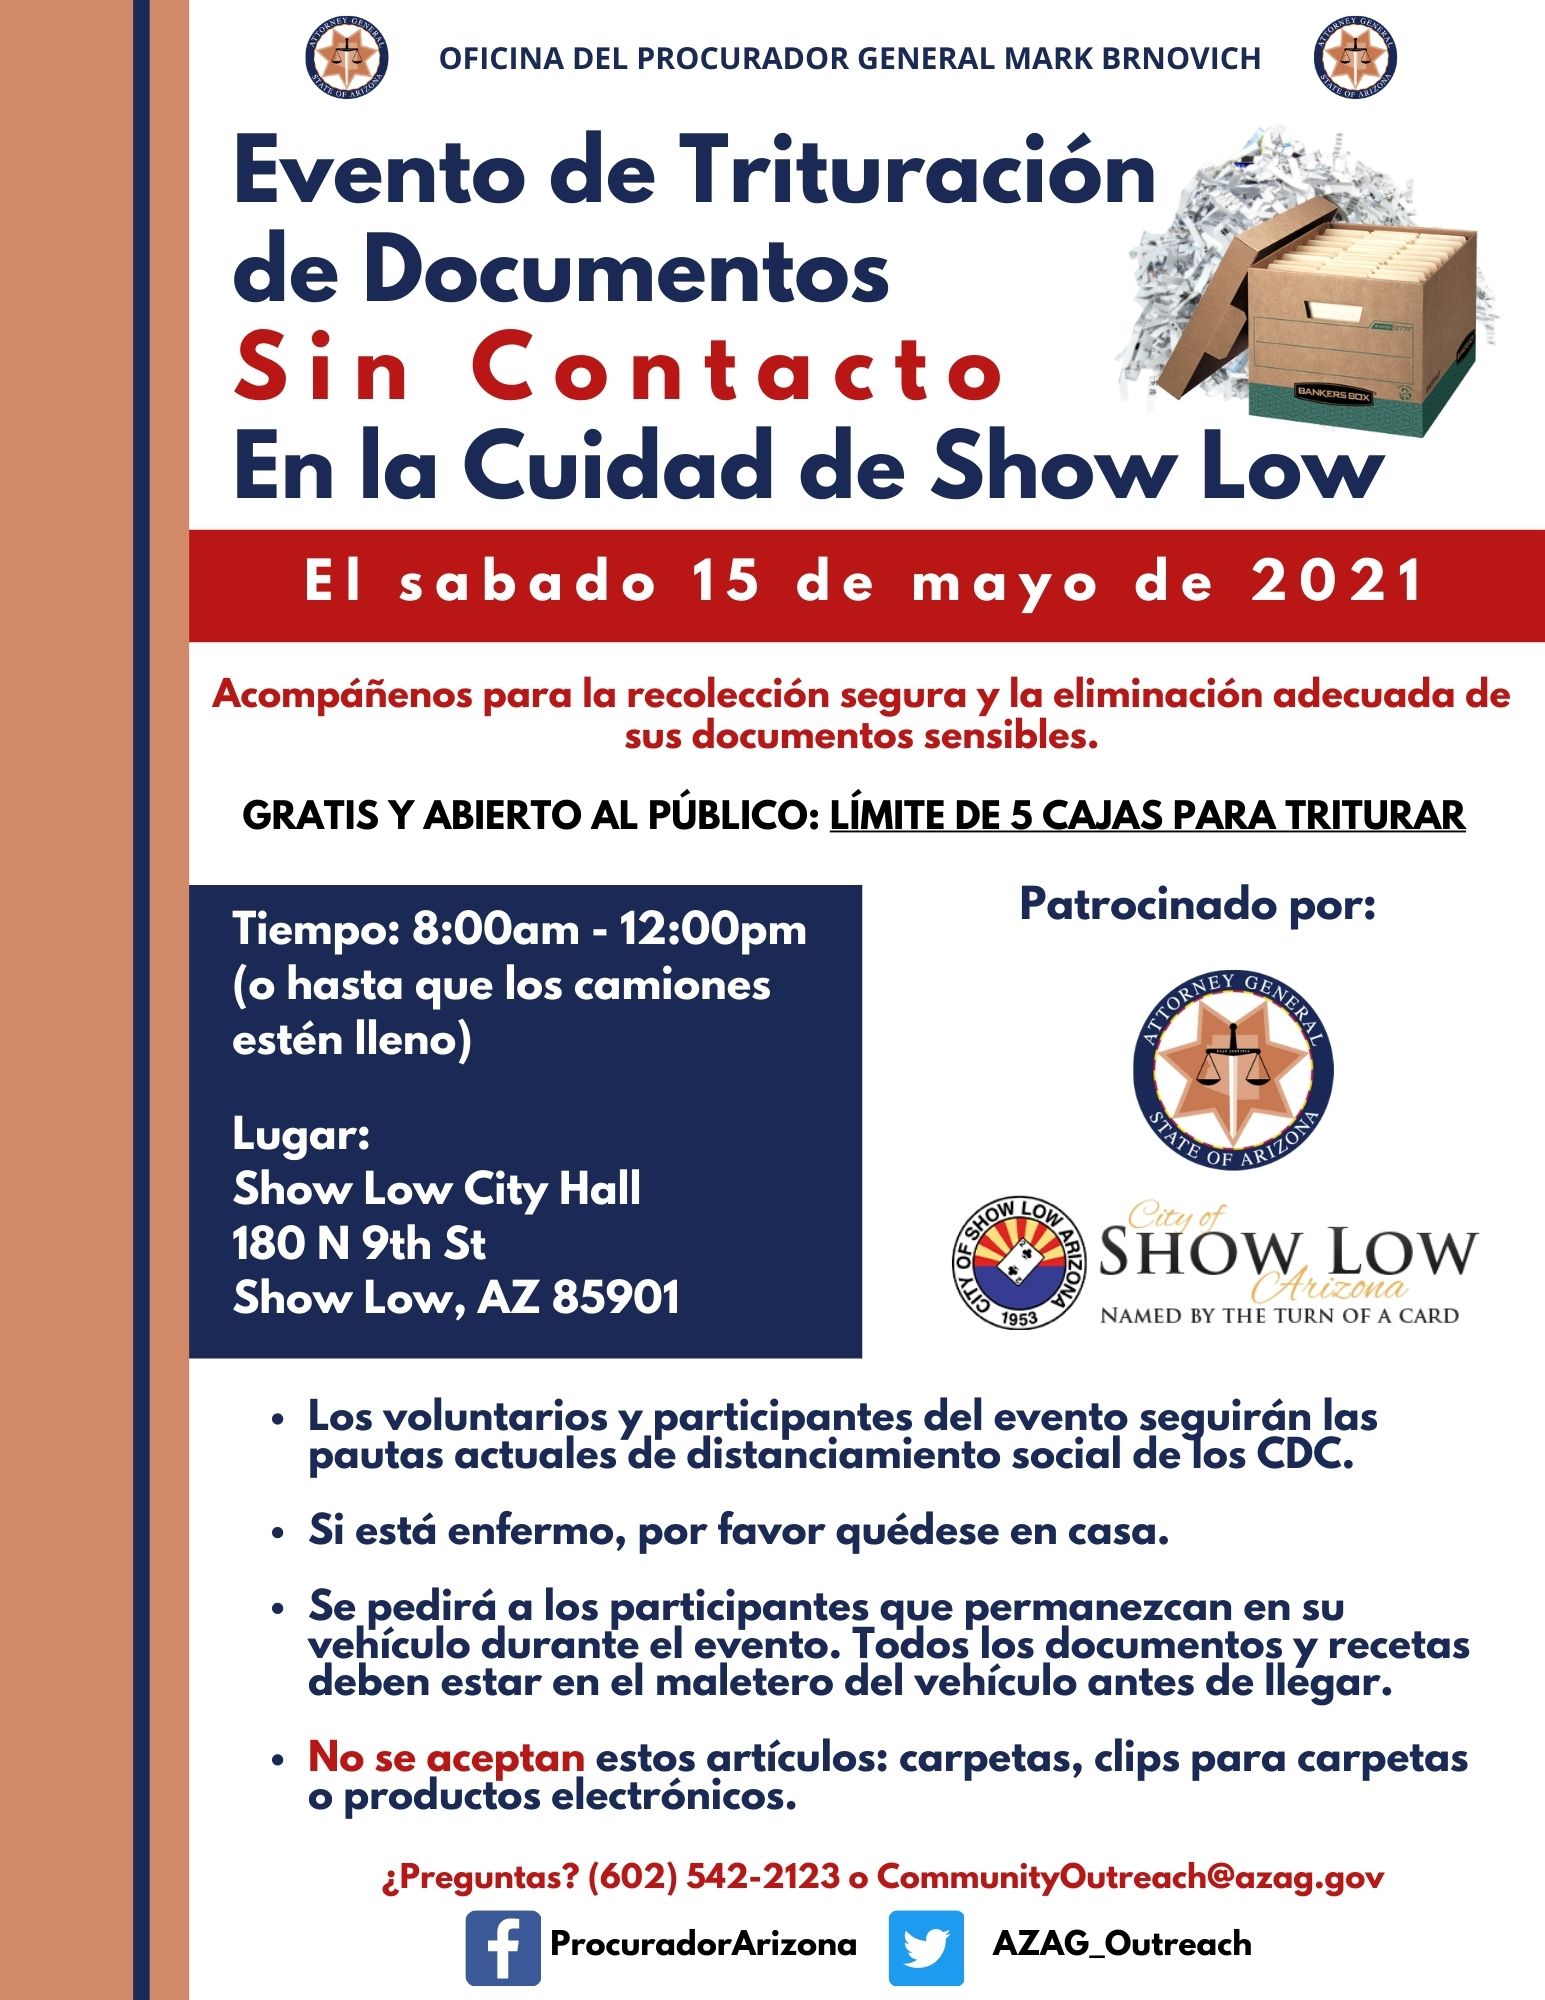 Show Low flyer in Spanish